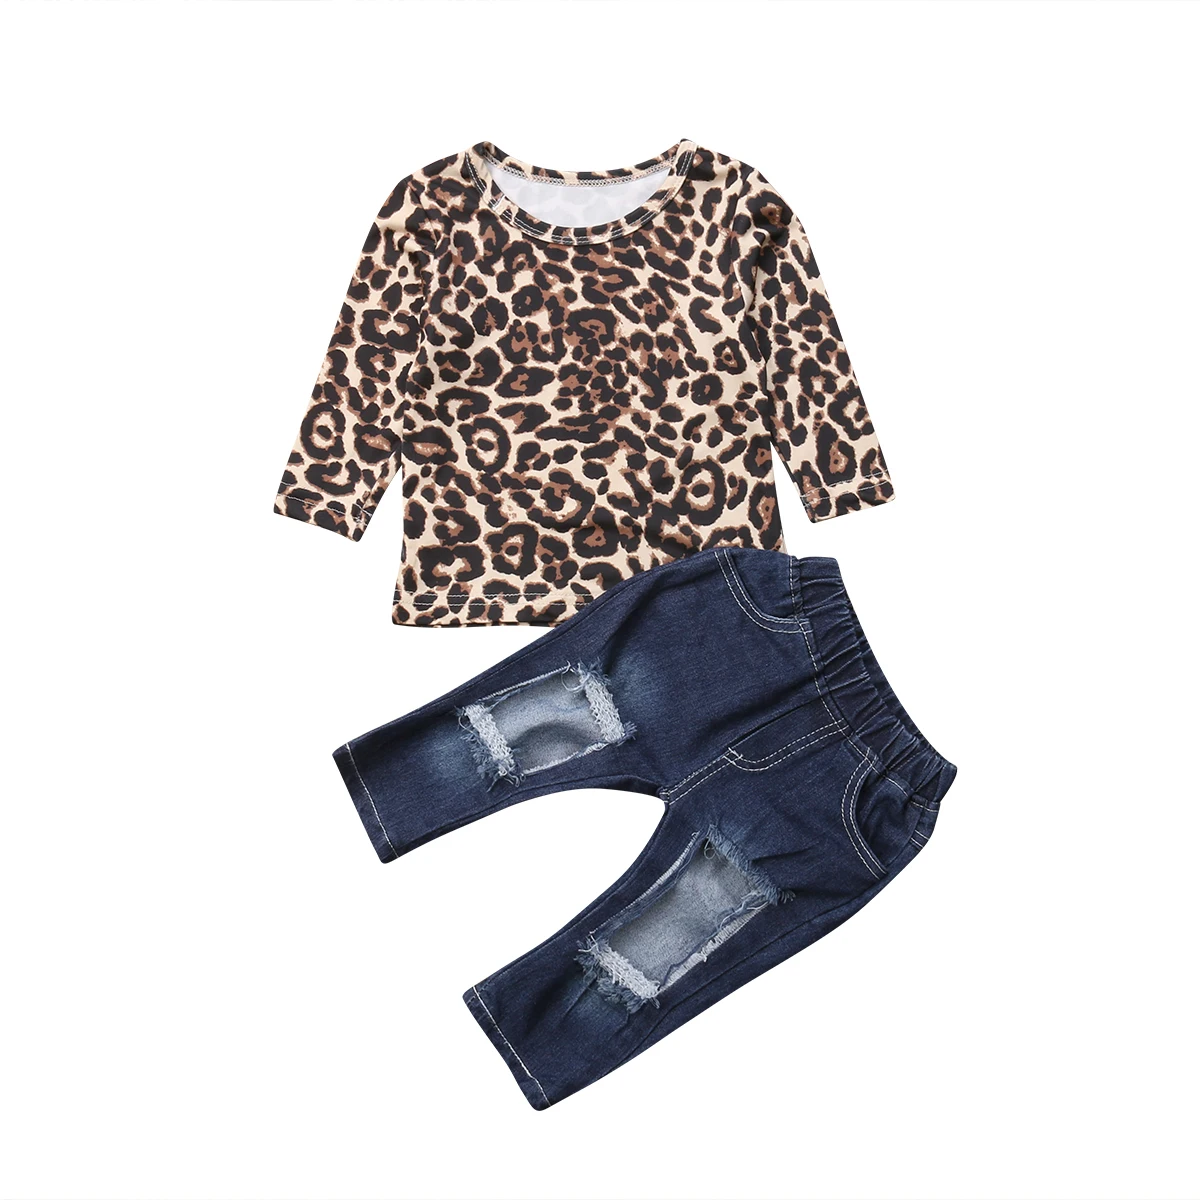  Toddler Baby Girl Leopard Long Sleeve Tops Shirt Ripped Denim Destroyed Jeans Pants Kids Clothes Ou